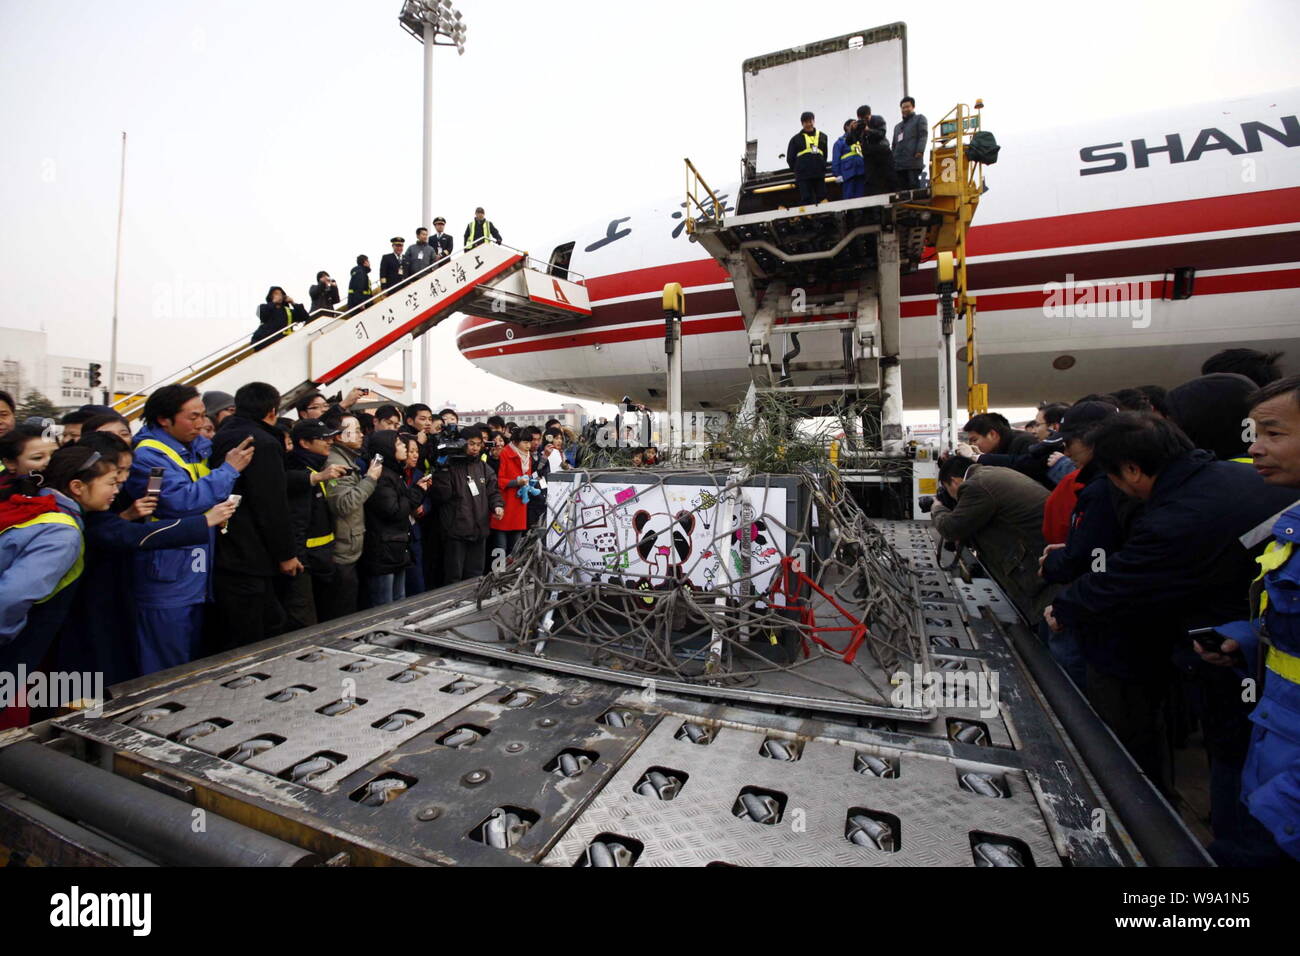 Giant pandas from Bifengxia Base of the Wolong Giant Panda Reserve Center are unloaded from a plane at the Hongqiao International Airport in Shanghai, Stock Photo